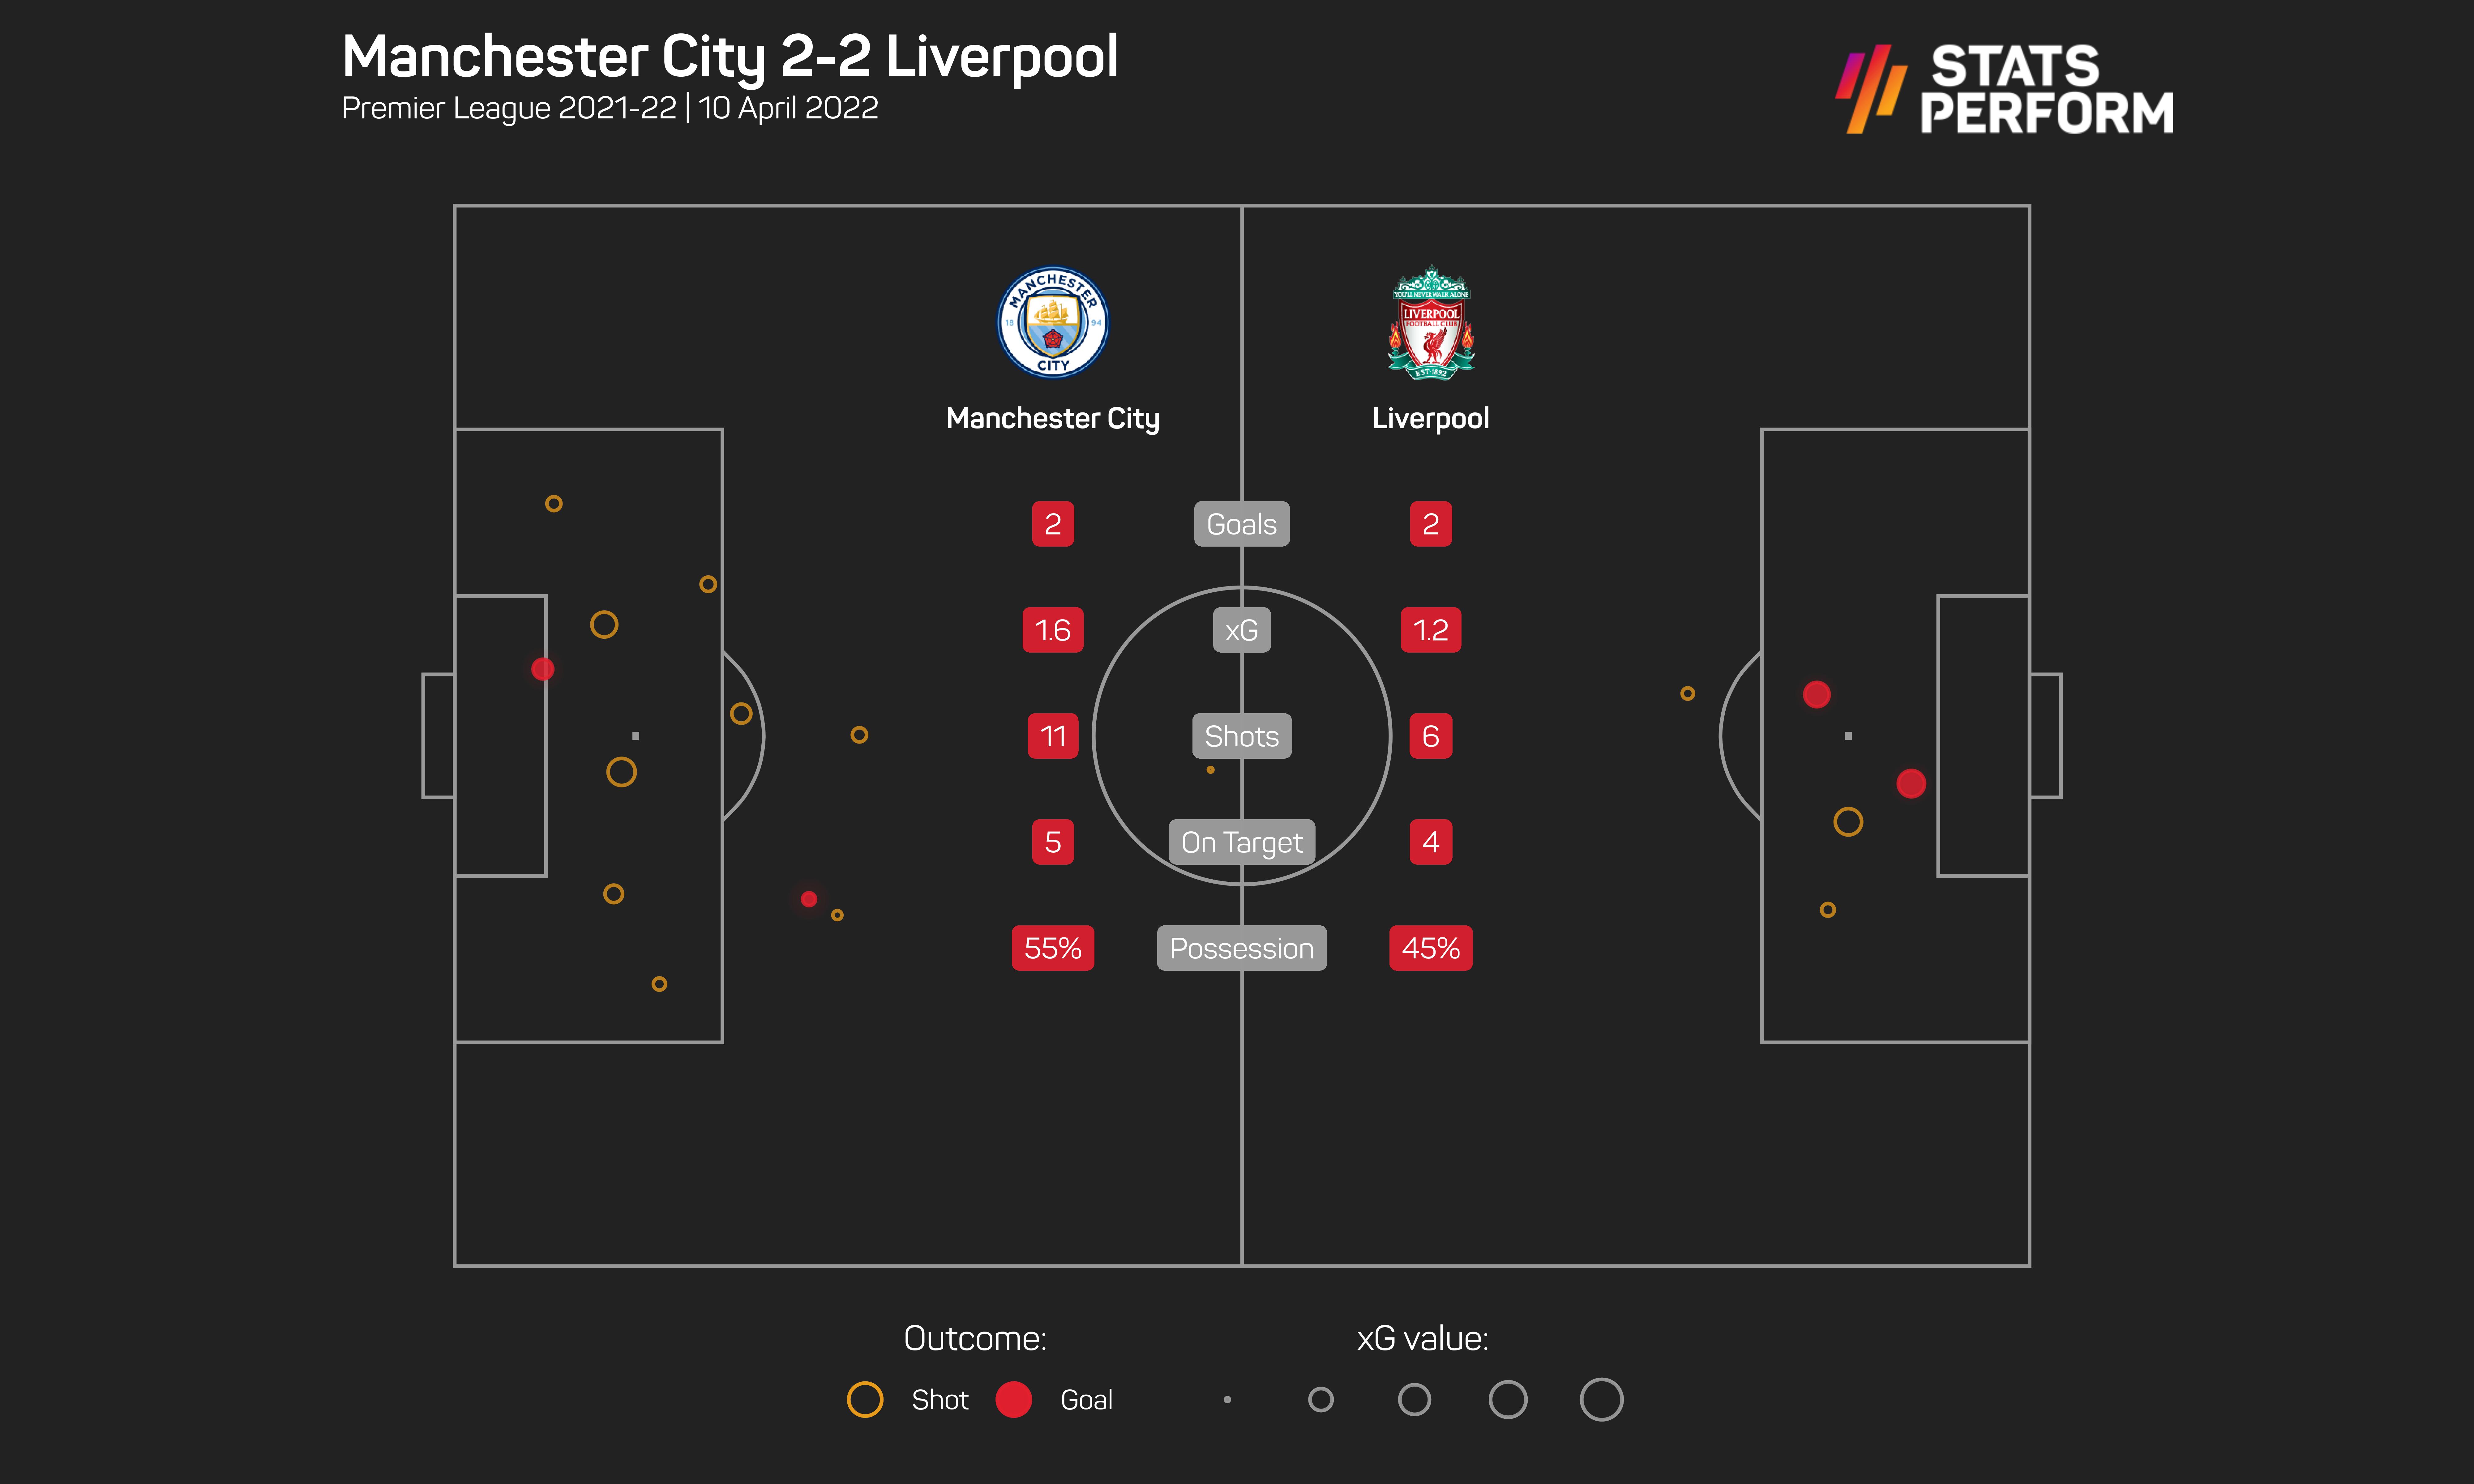 Manchester City and Liverpool played out a couple of 2-2 draws in the league last season